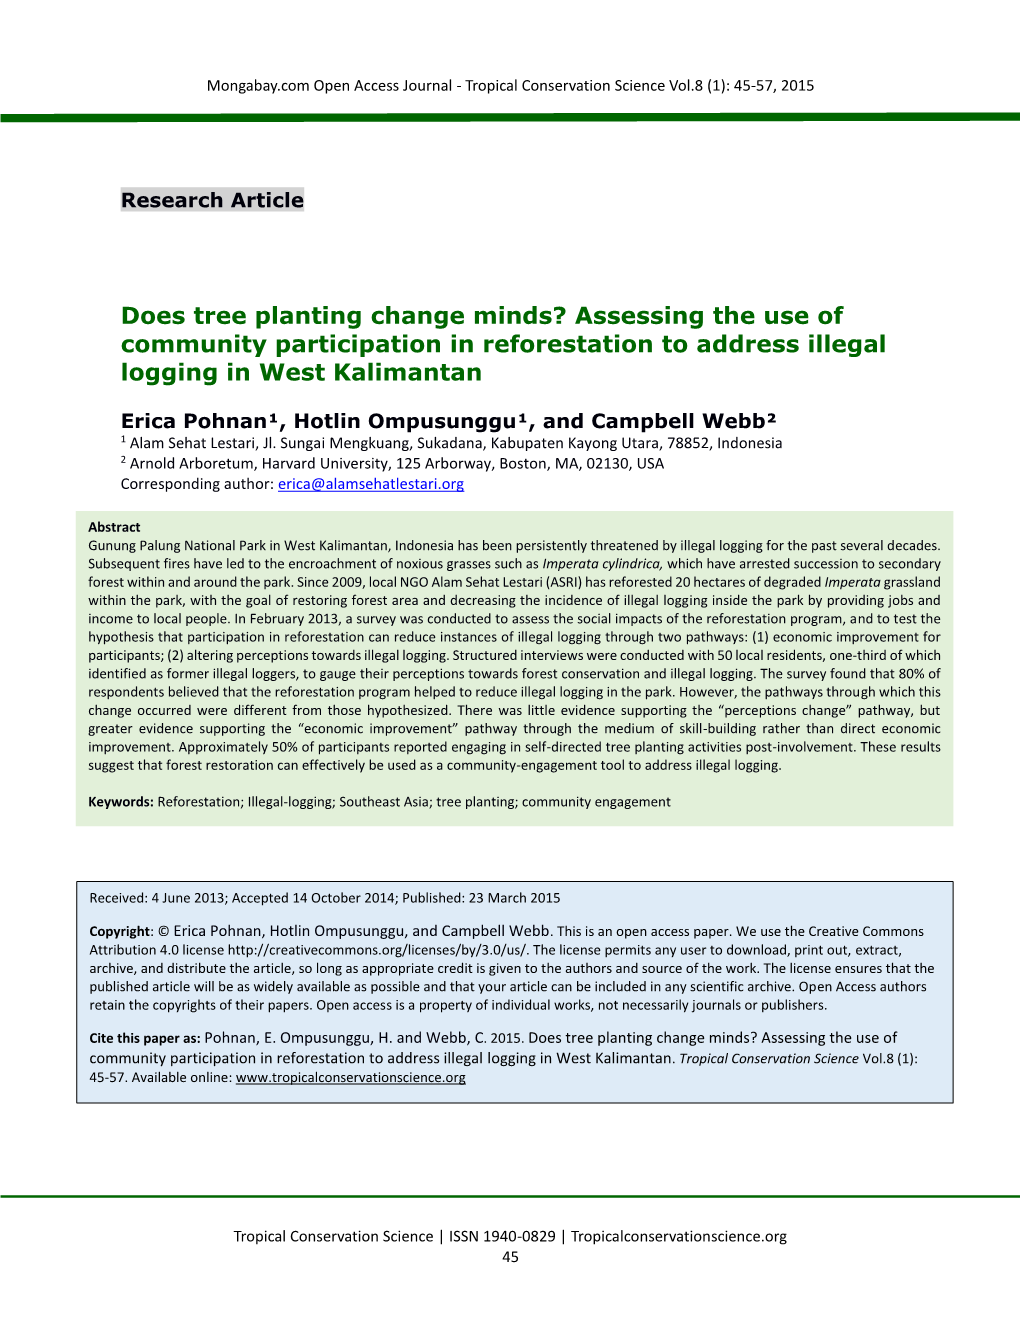 Does Tree Planting Change Minds? Assessing the Use of Community Participation in Reforestation to Address Illegal Logging in West Kalimantan